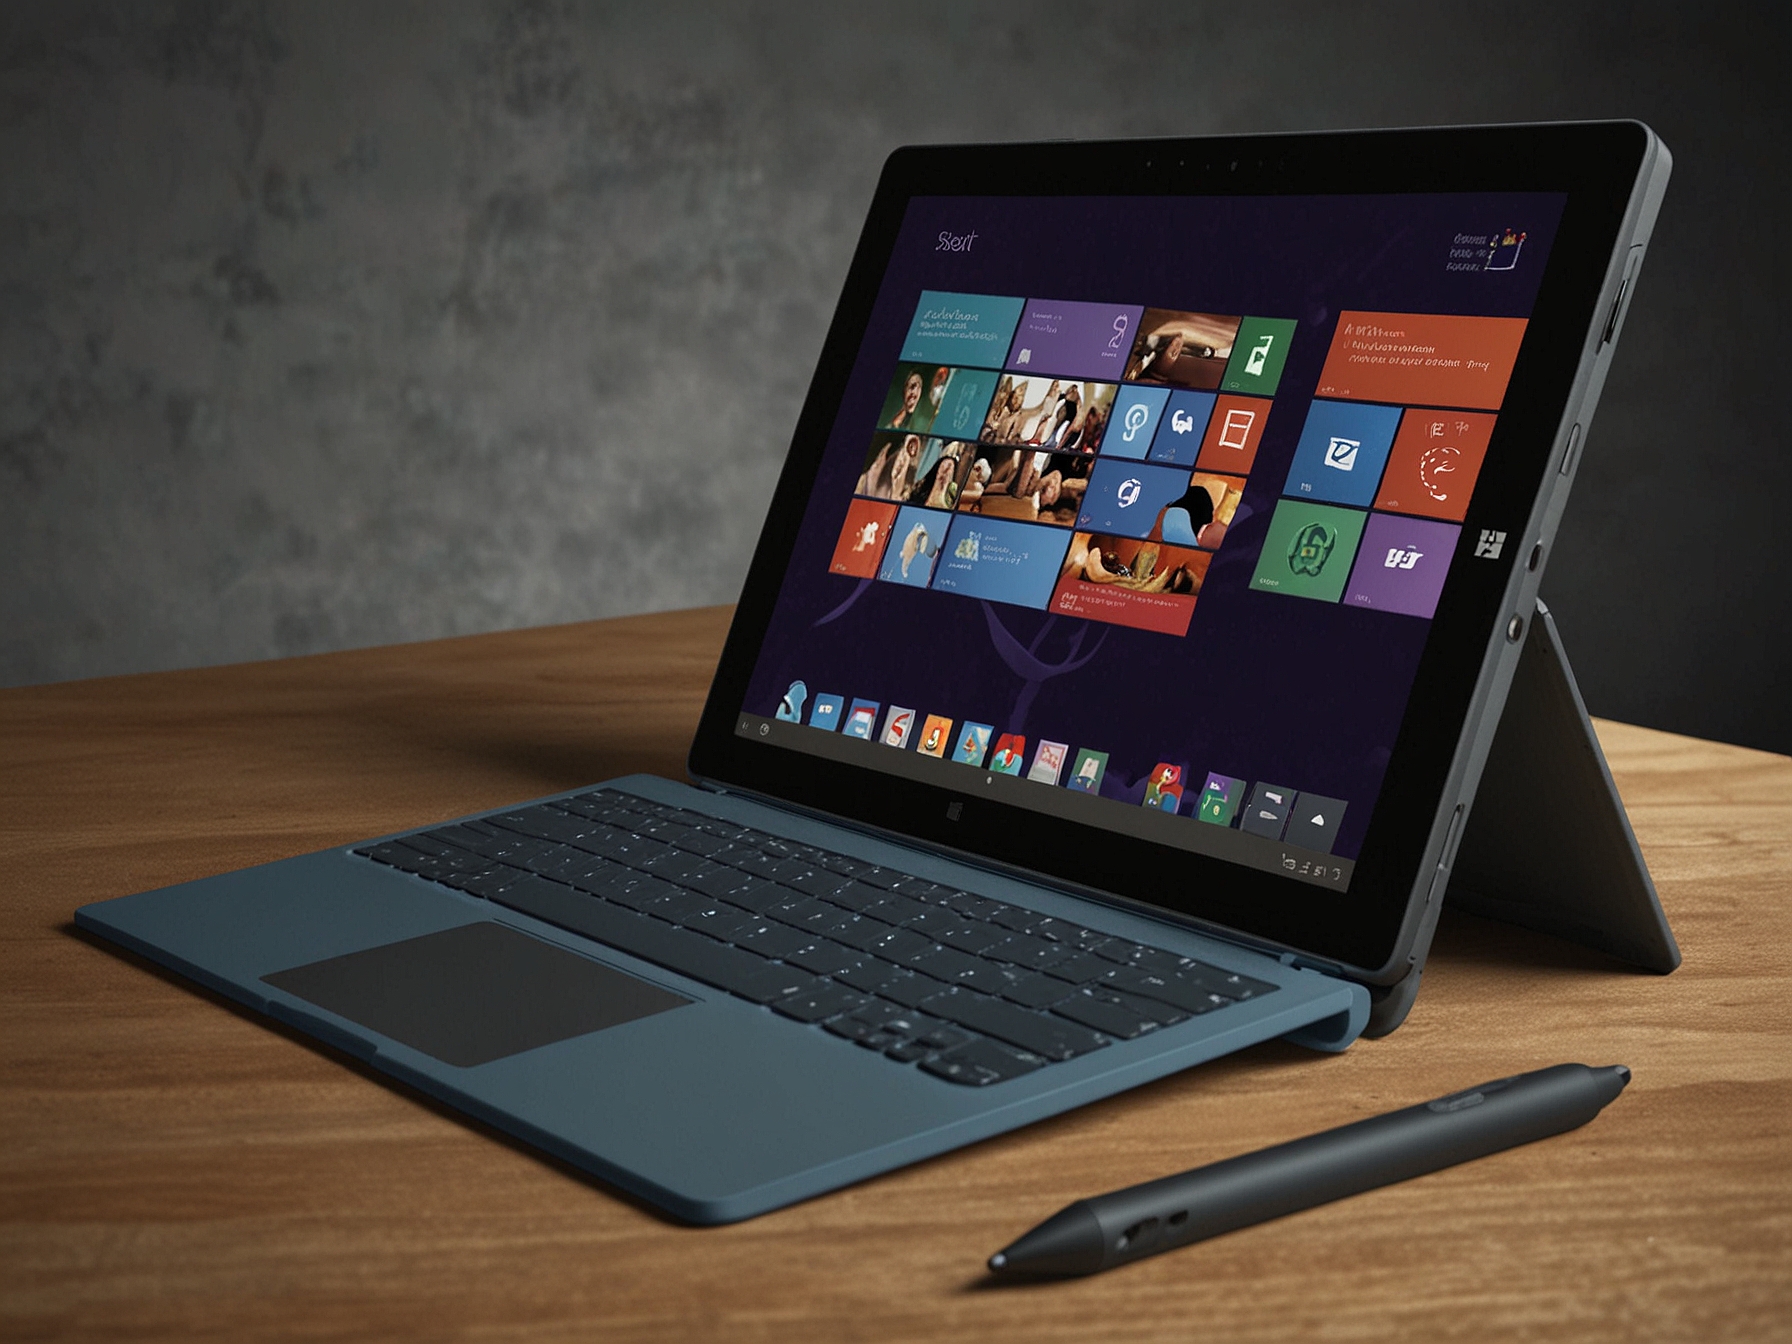 An image showcasing the Microsoft Surface Pro 11 in both tablet and laptop modes, highlighting the sturdy kickstand, detachable Type Cover keyboard, and its versatile design.